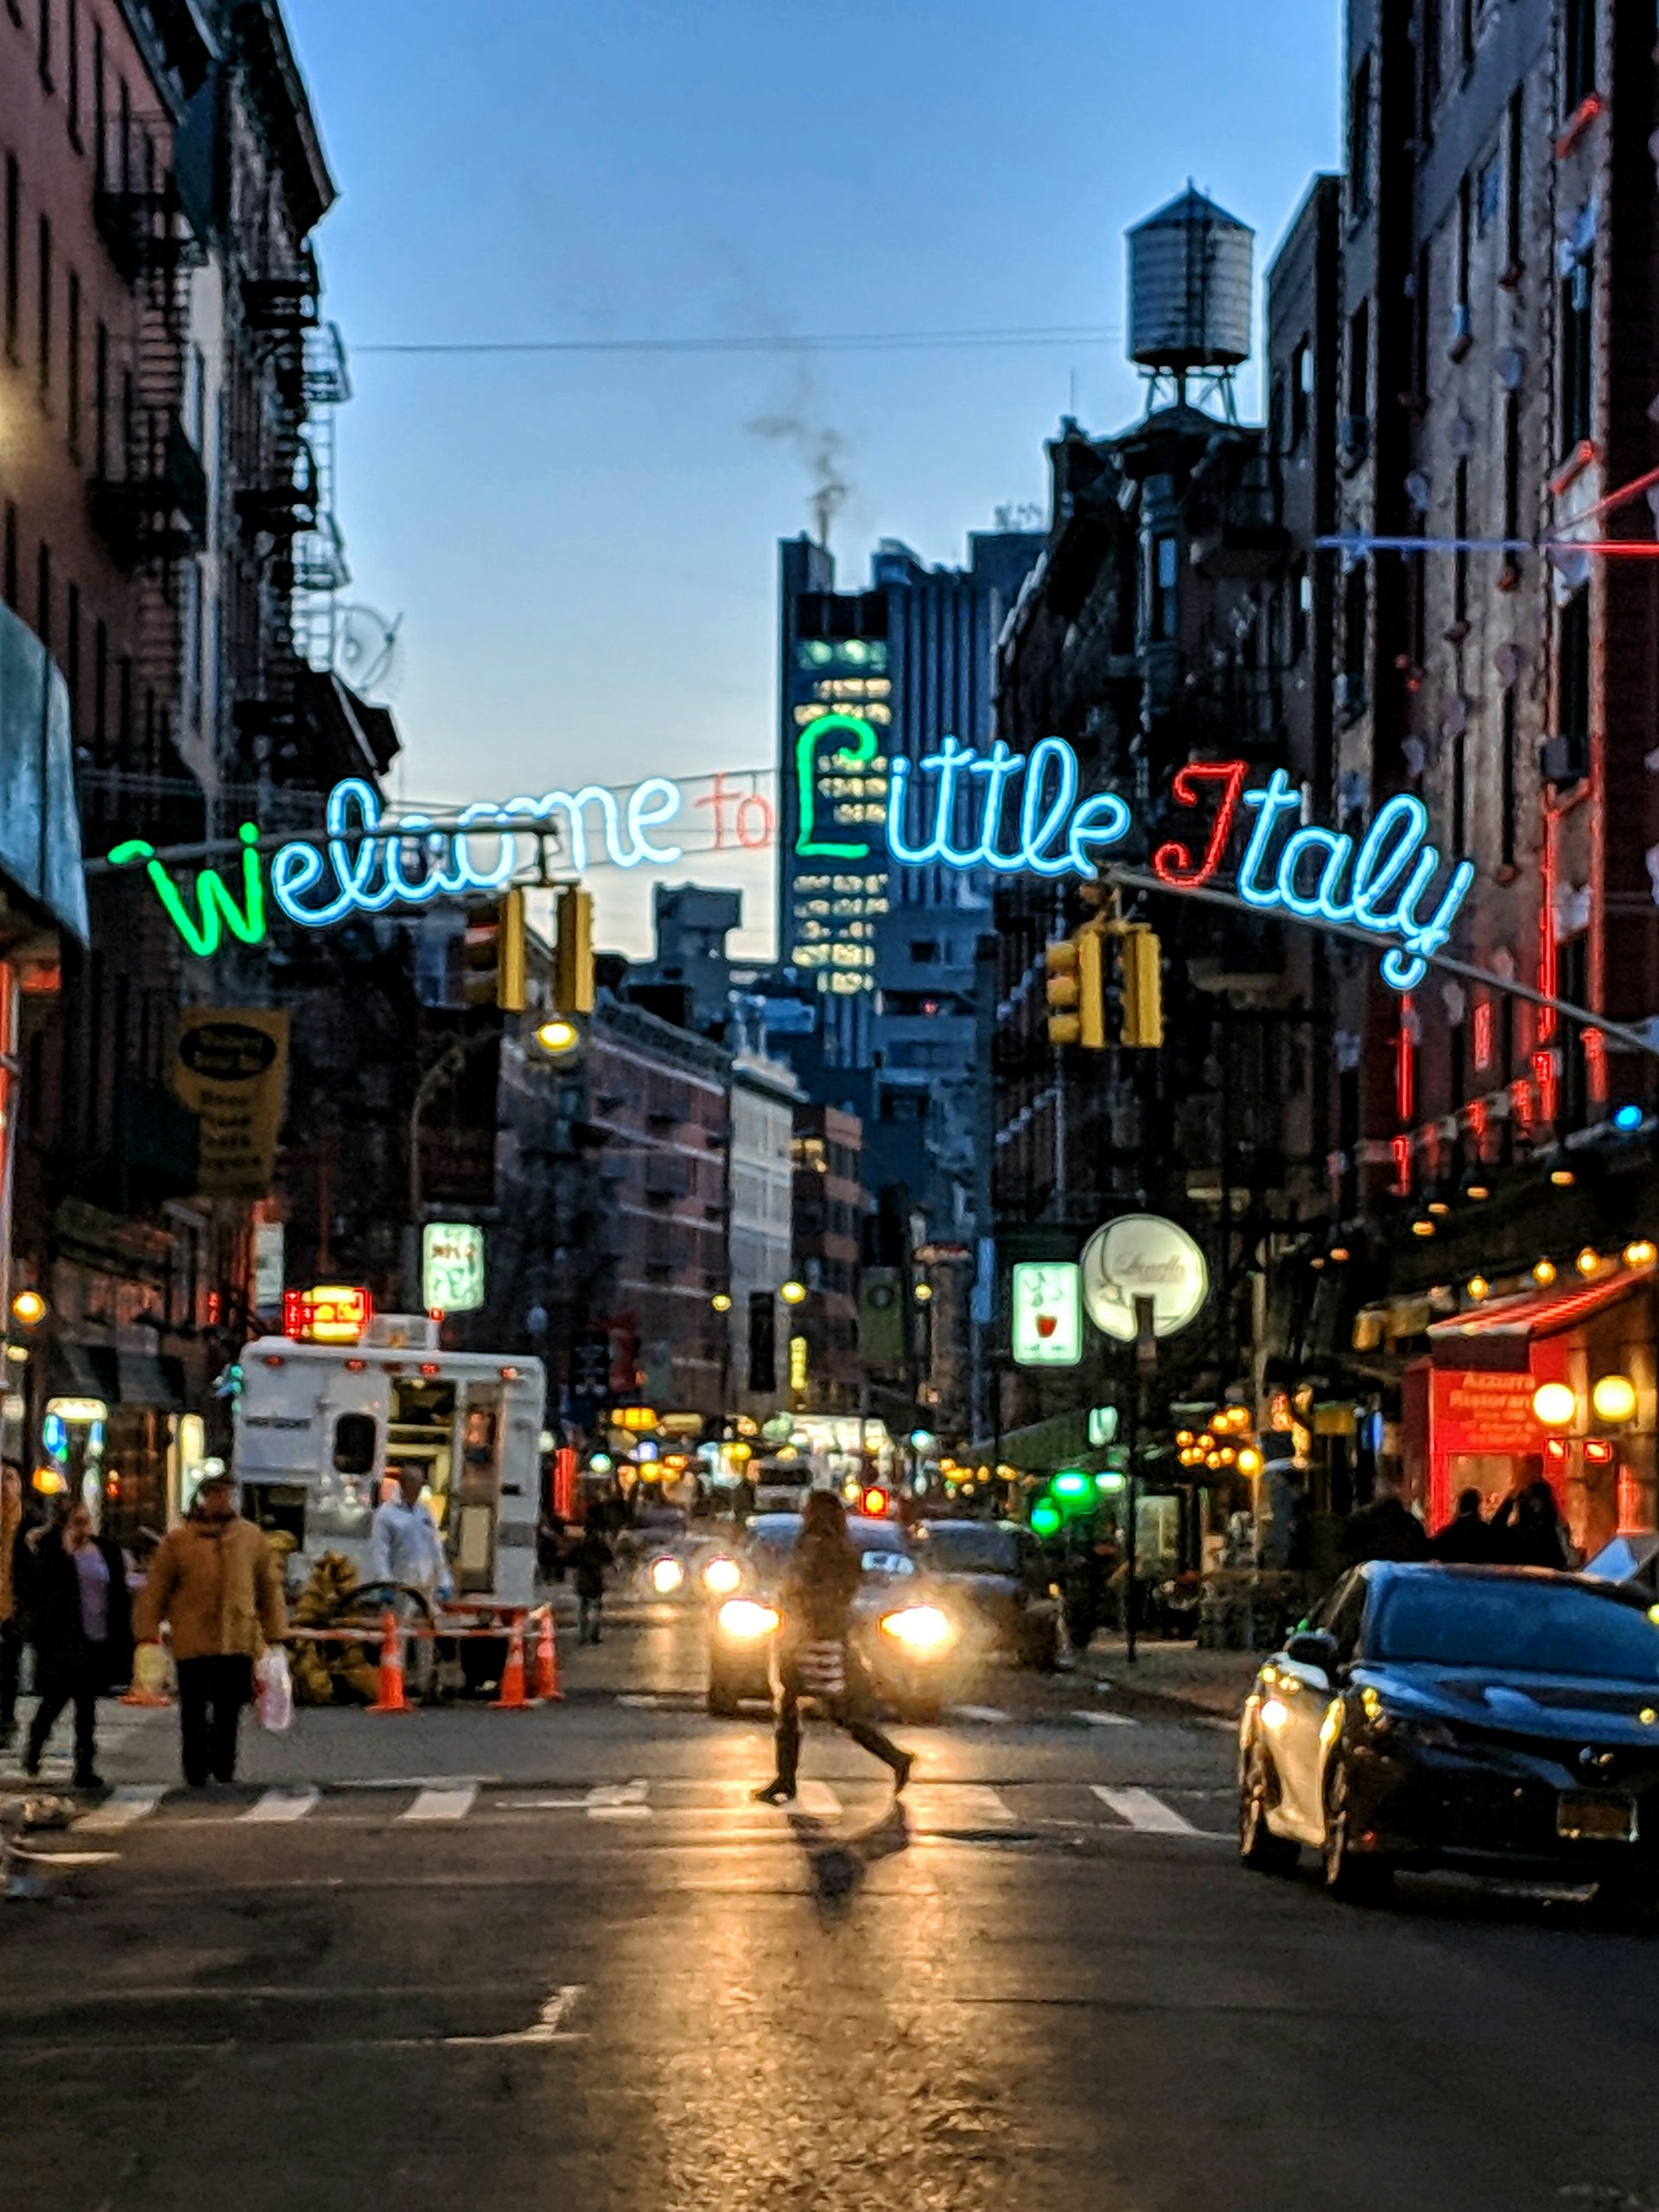 Welcome to Little Italy sign, New York City